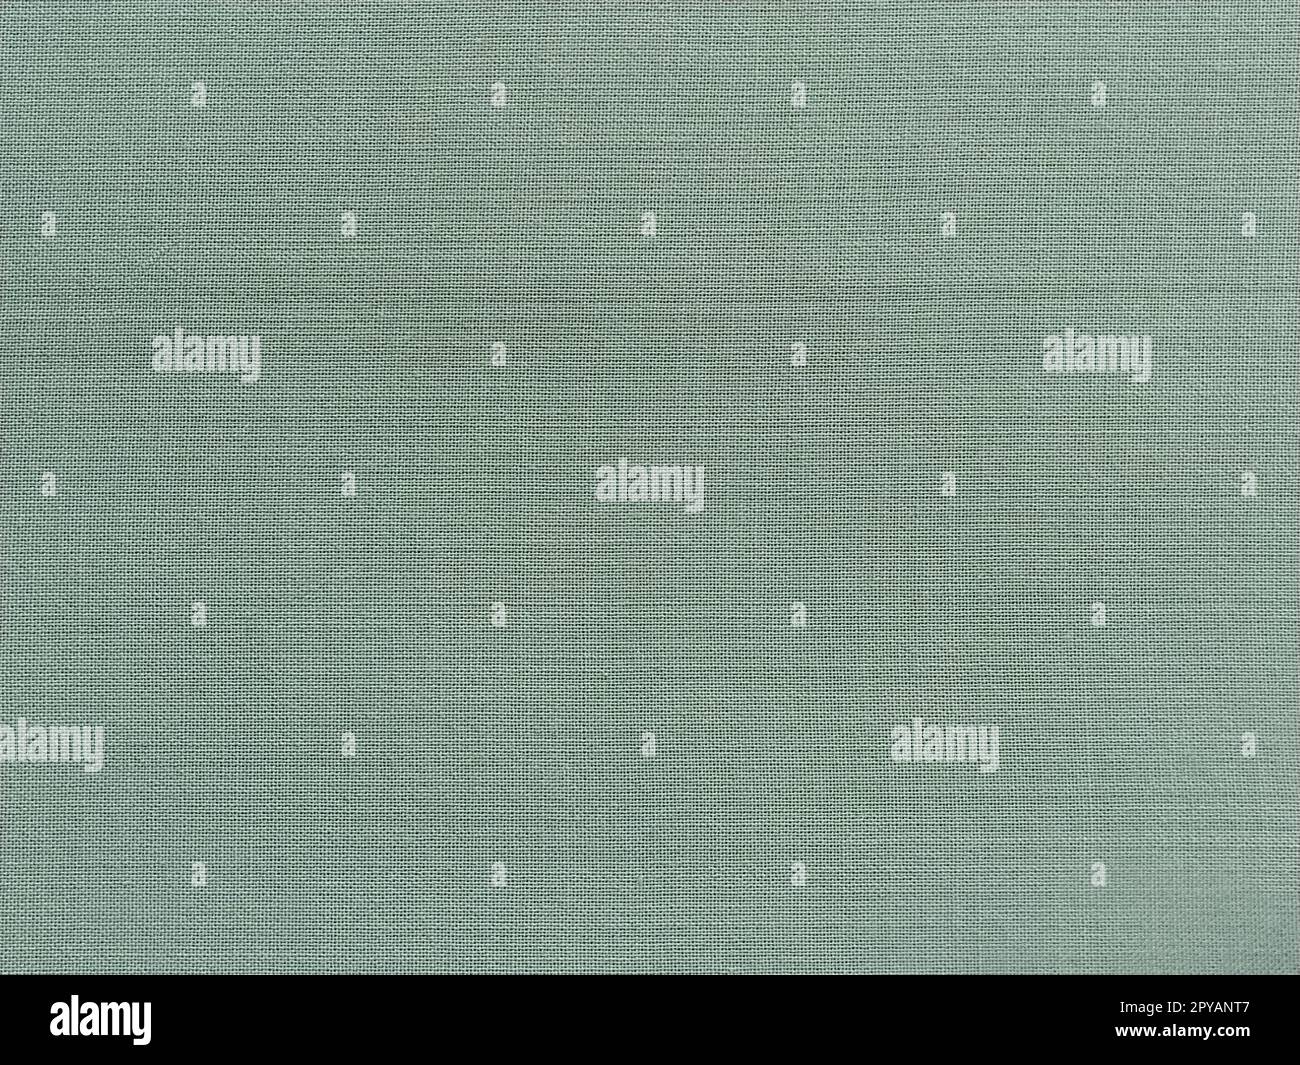 pale light green fabric. A piece of woolen fabric laid out neatly on the surface. Interlacing and textile texture. dress fabric or for kitchen needs, tablecloth or curtains Stock Photo